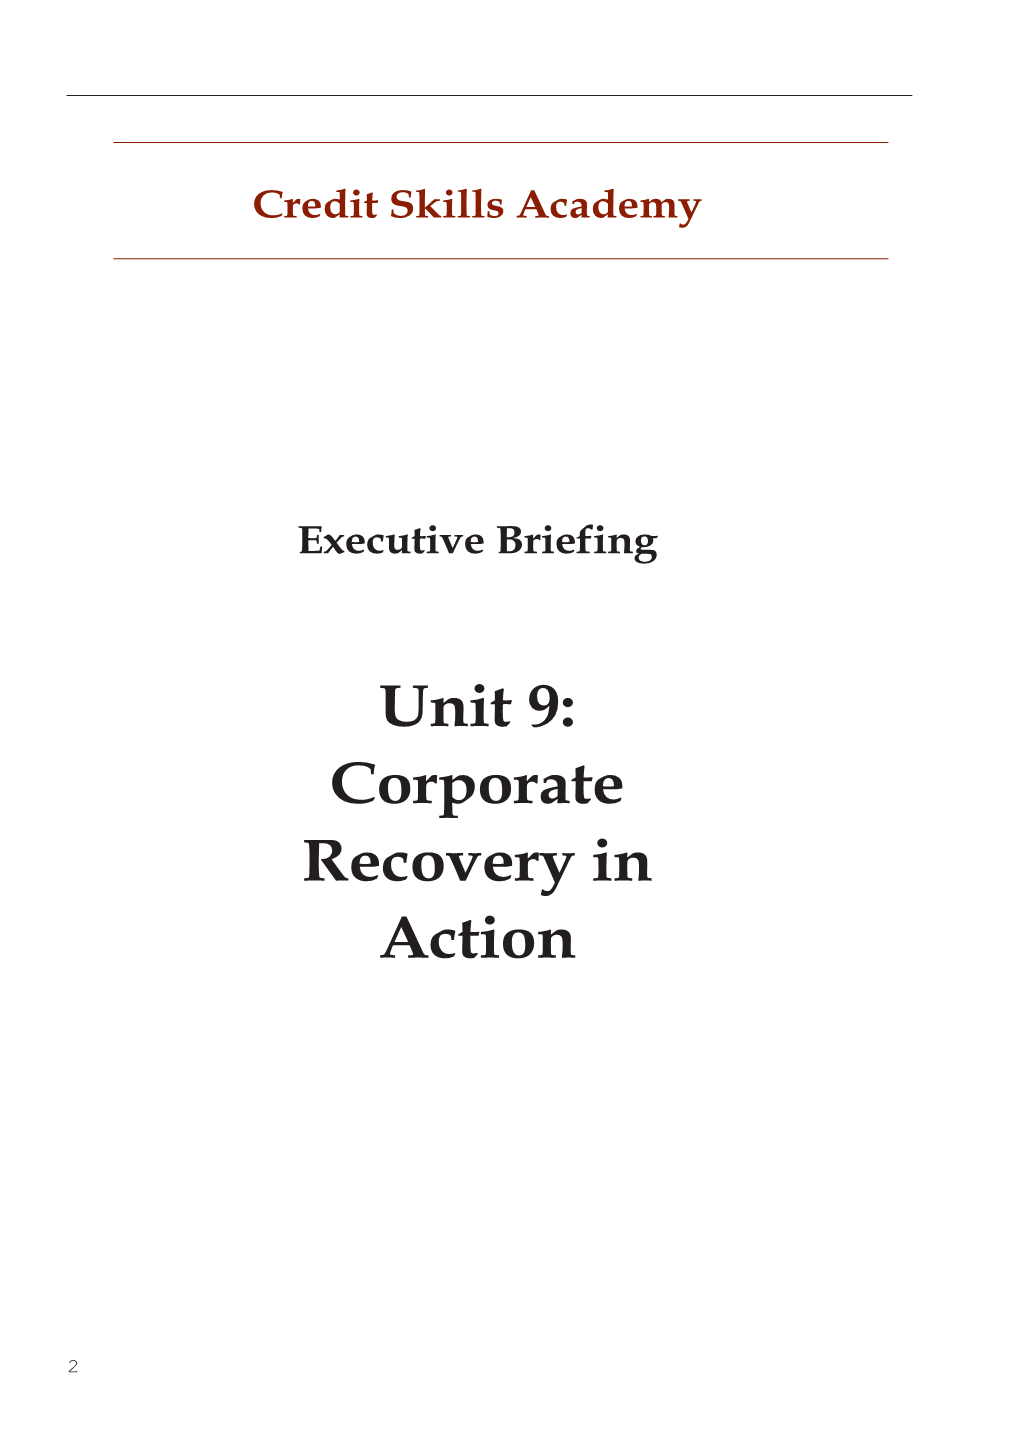 Unit 9: Corporate Recovery in Action